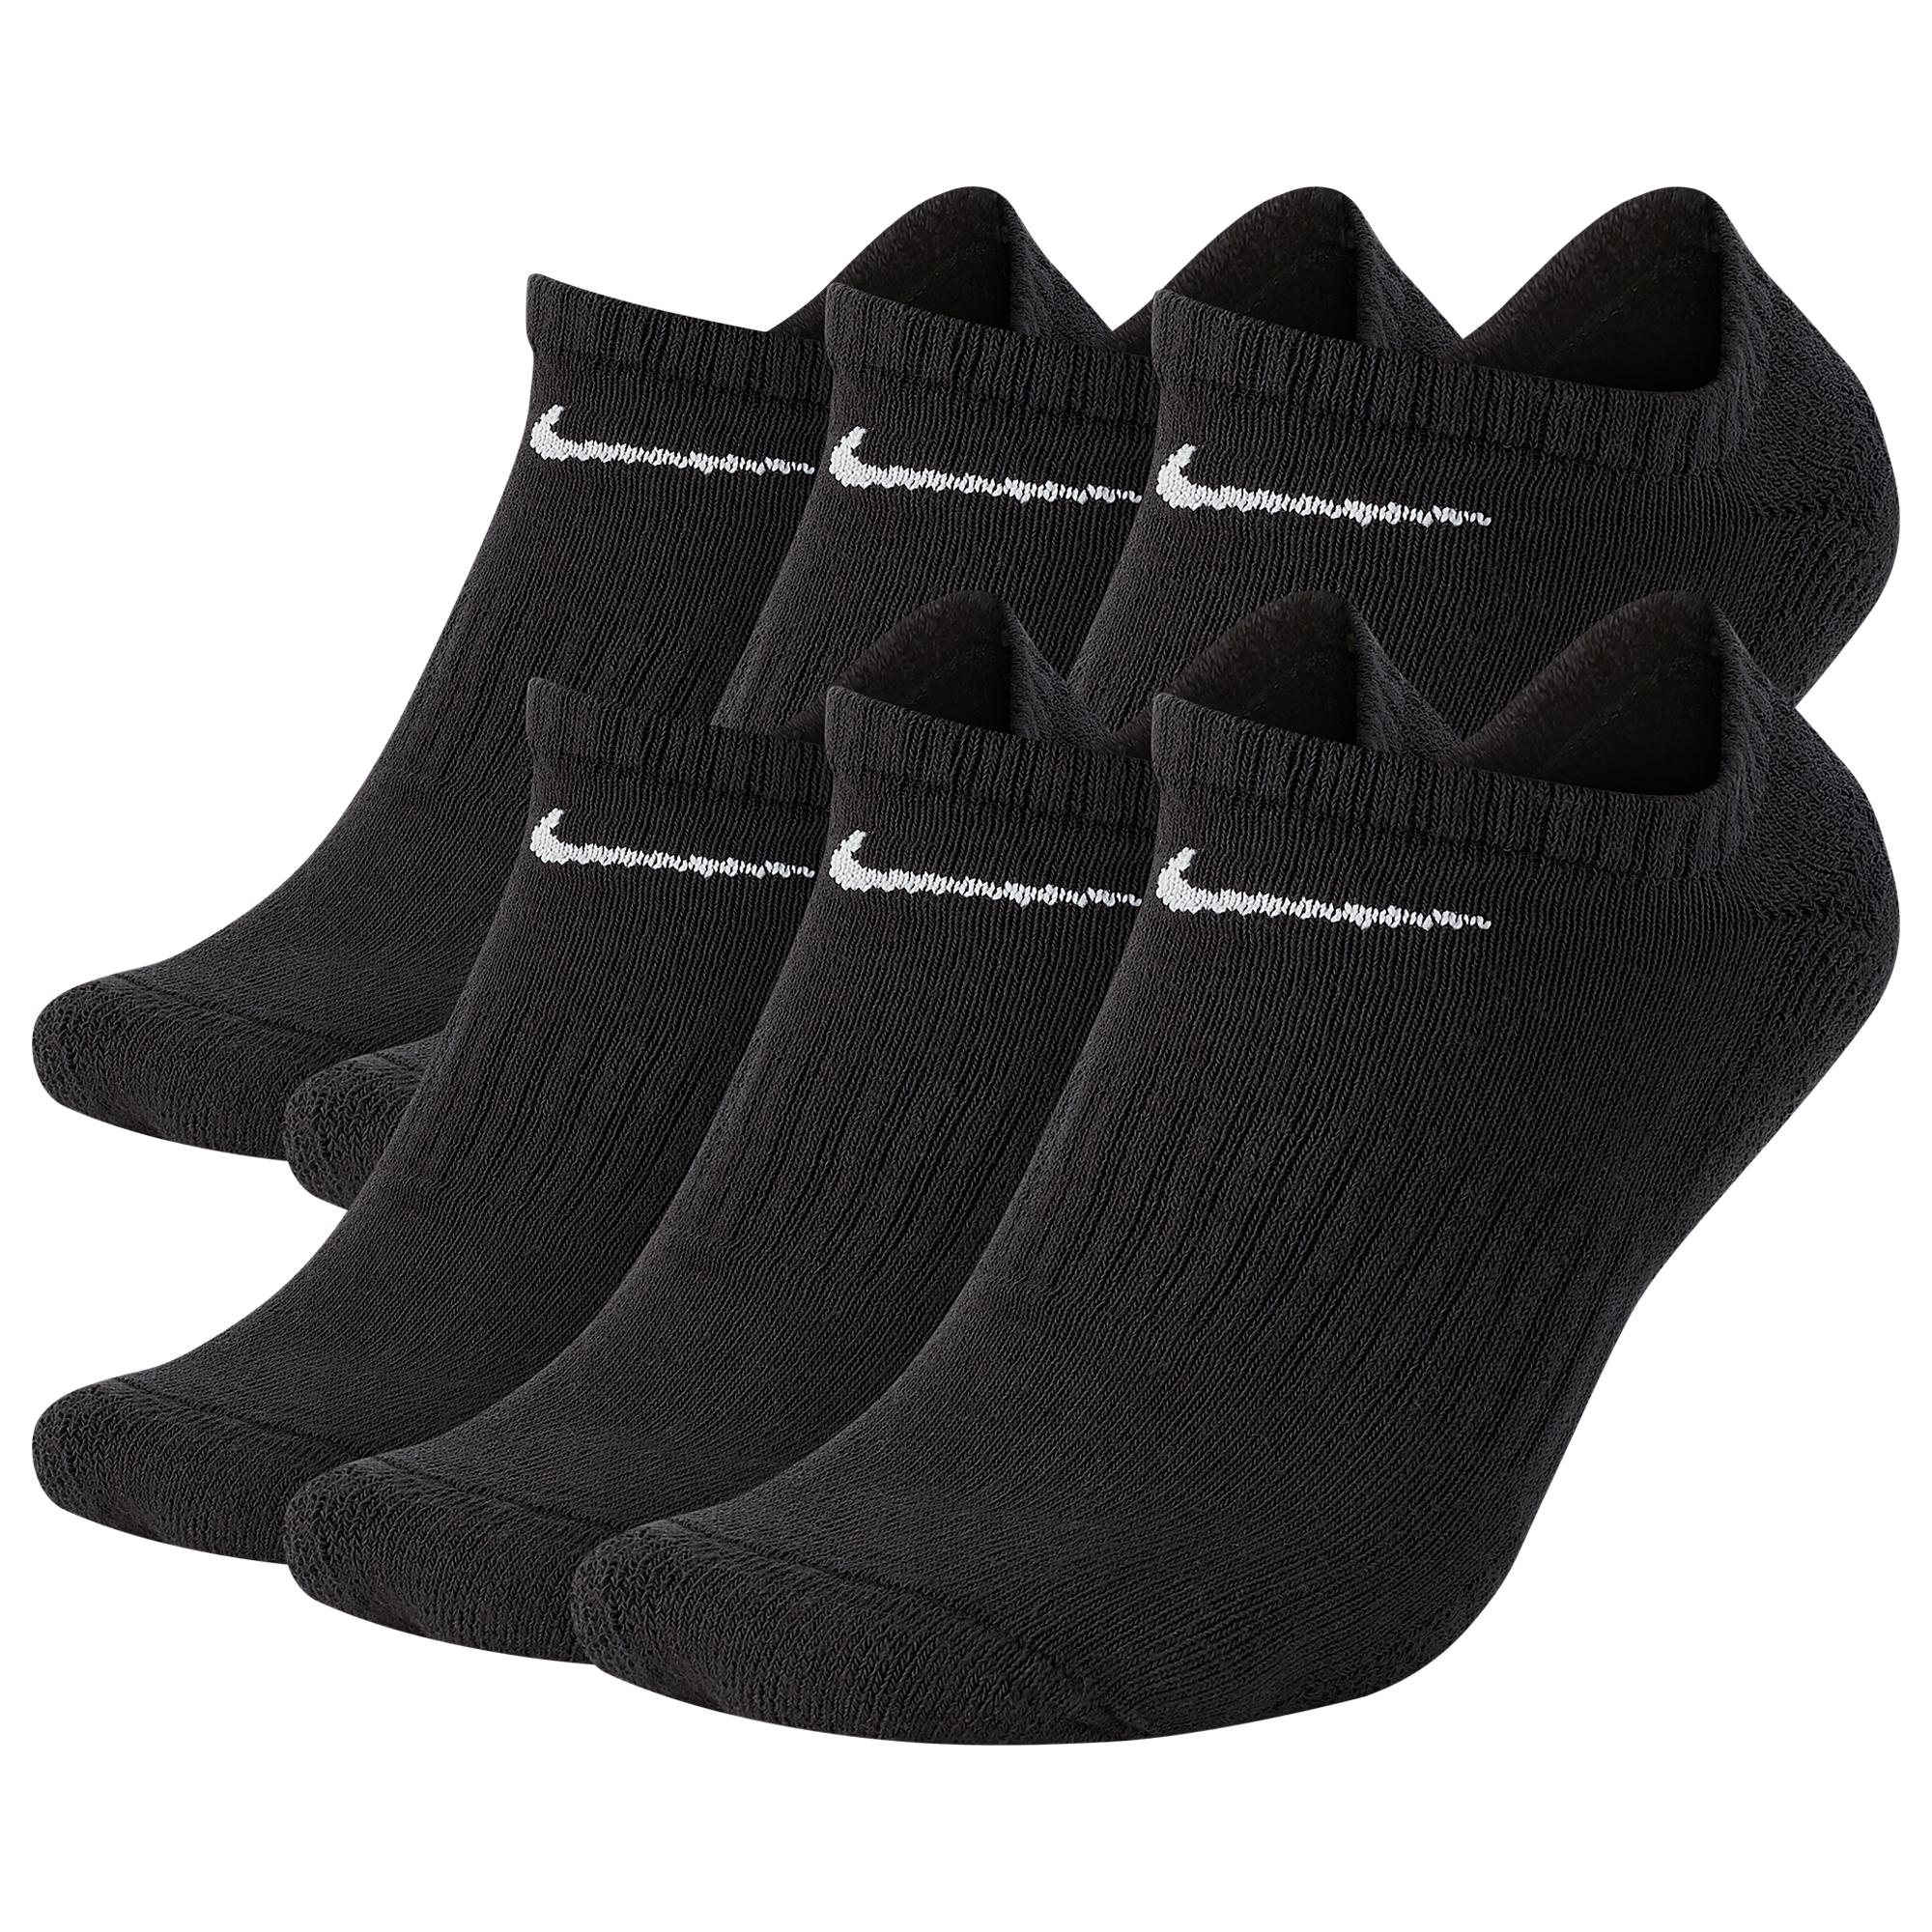 Nike 6 Pack Dri-fit Cotton No-show Socks in Black for Men - Lyst